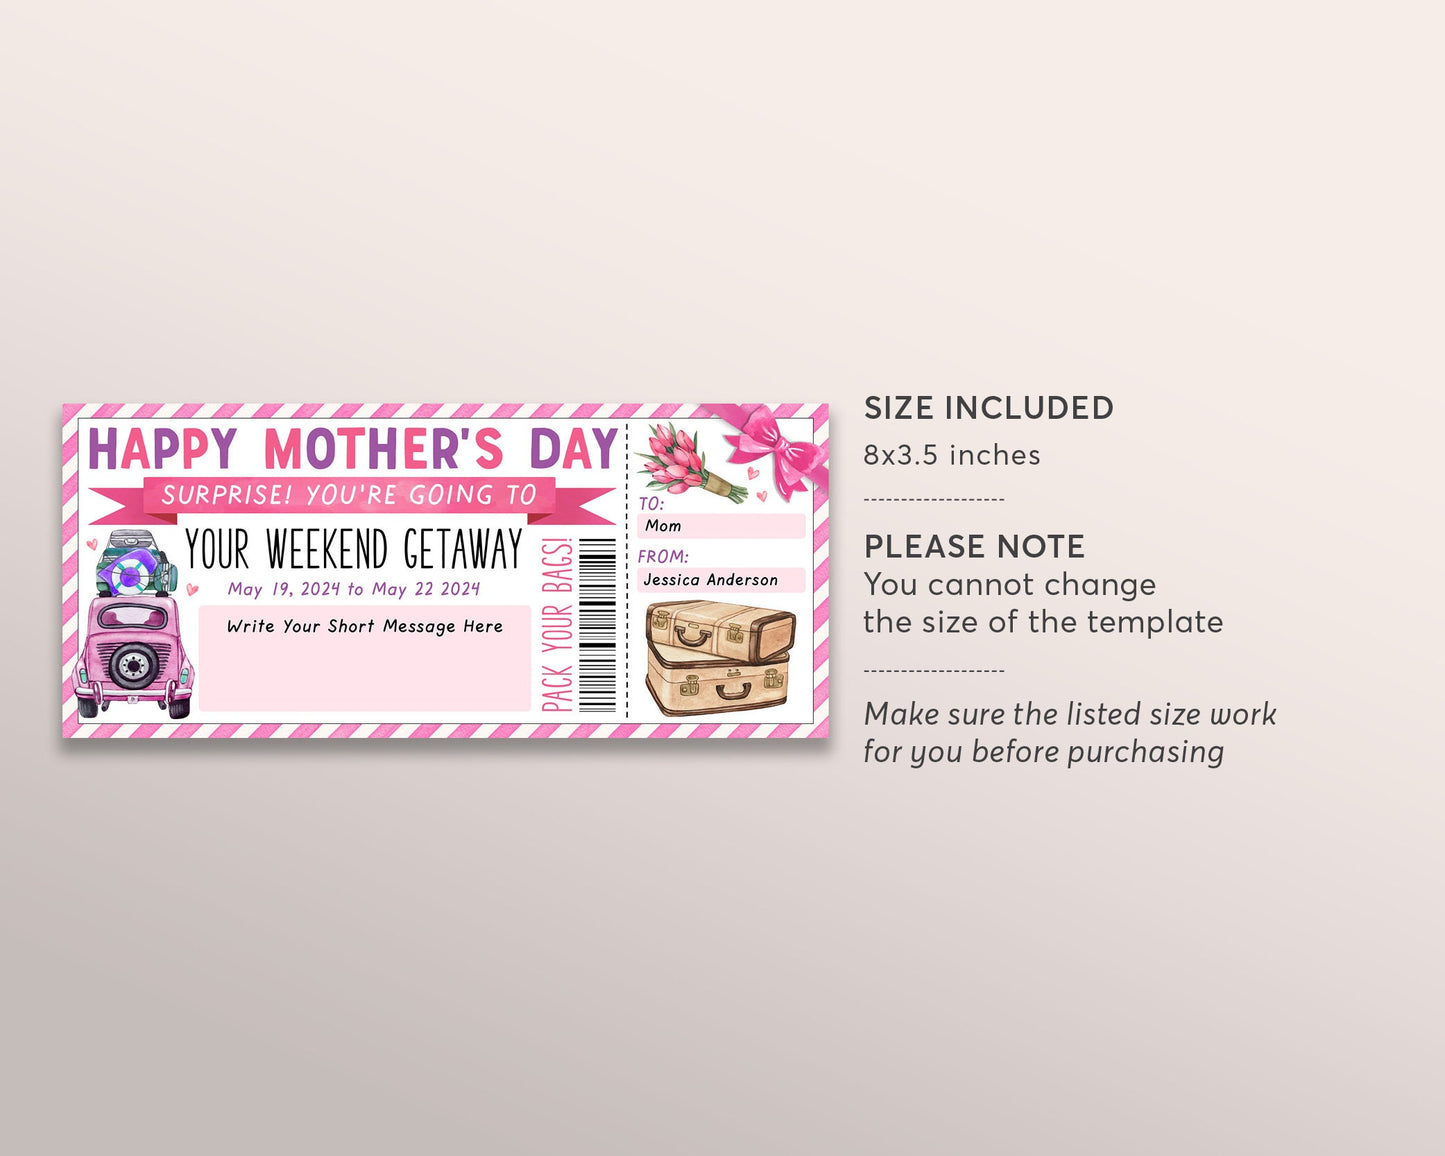 Mothers Day Weekend Getaway Voucher Editable Template, Surprise Vacation Travel Ticket For Mom, Gift Certificate Road Trip Staycation DIY